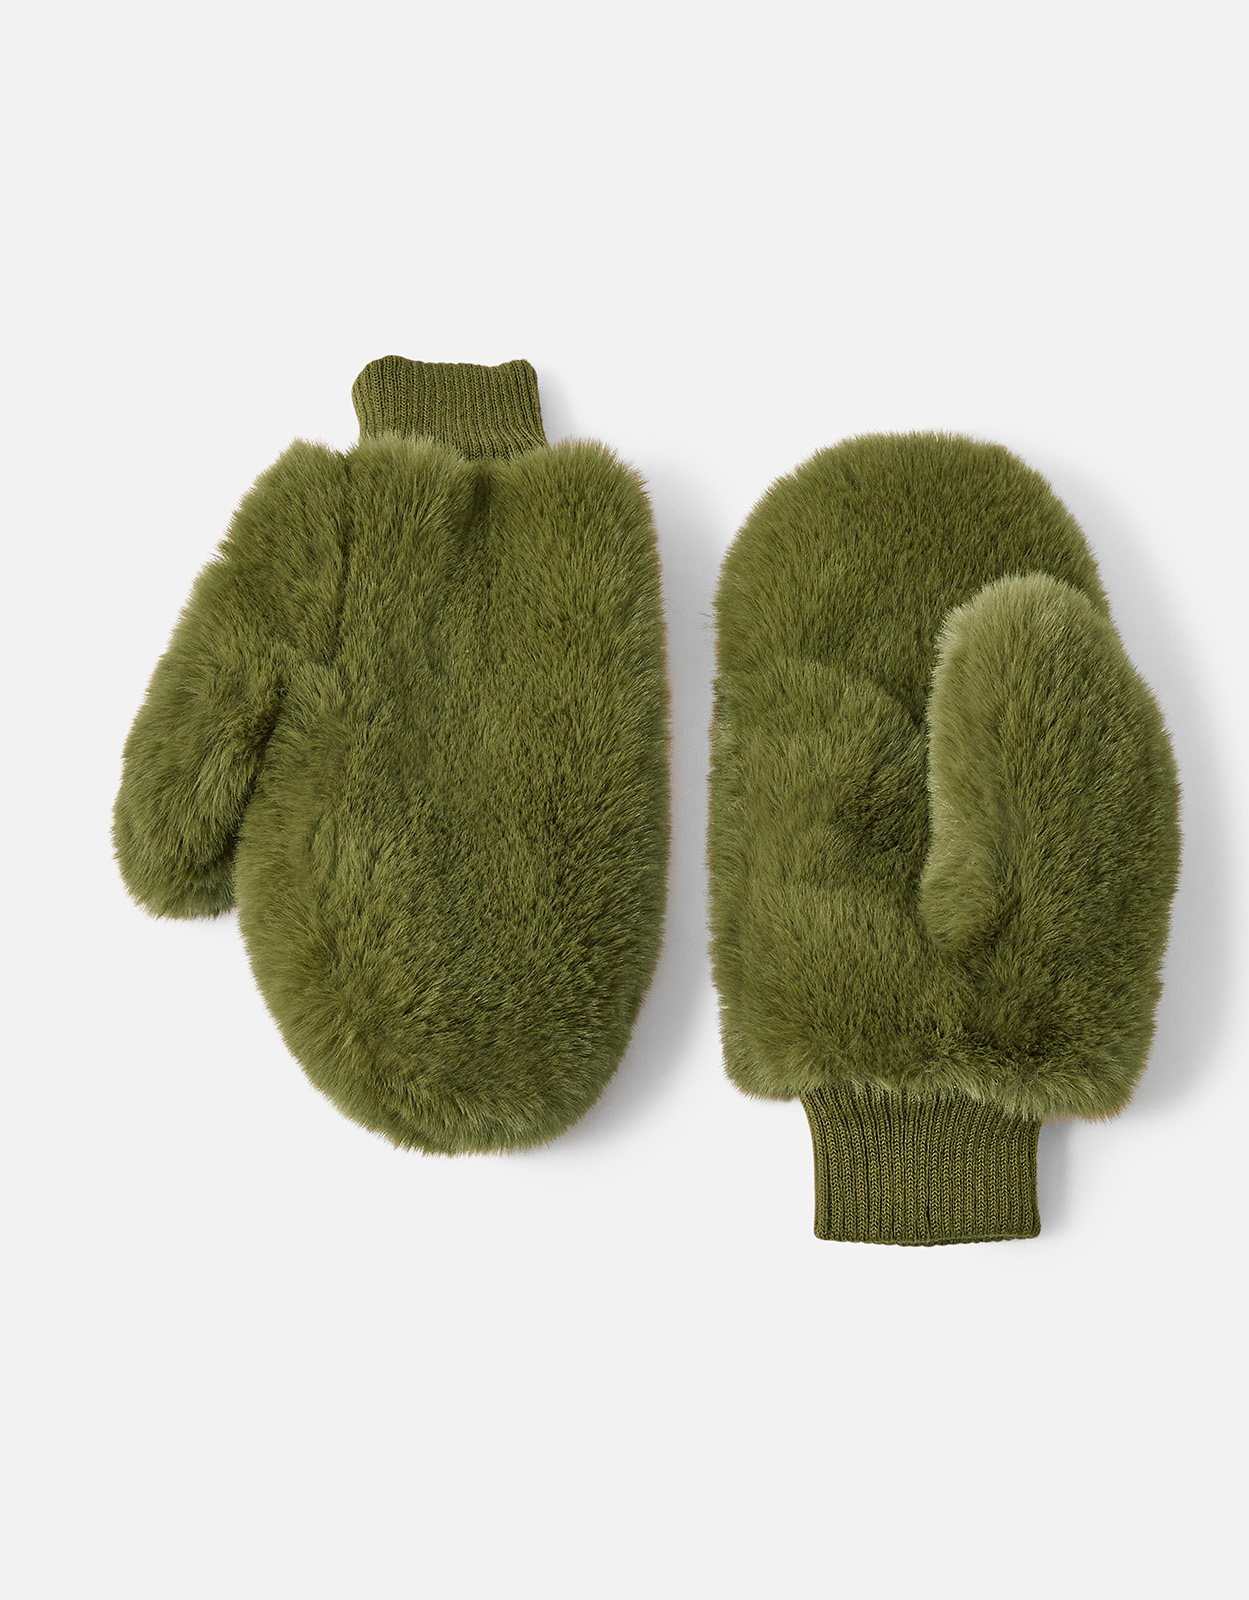 Accessorize Green Faux Fur Mittens, Size: One Size